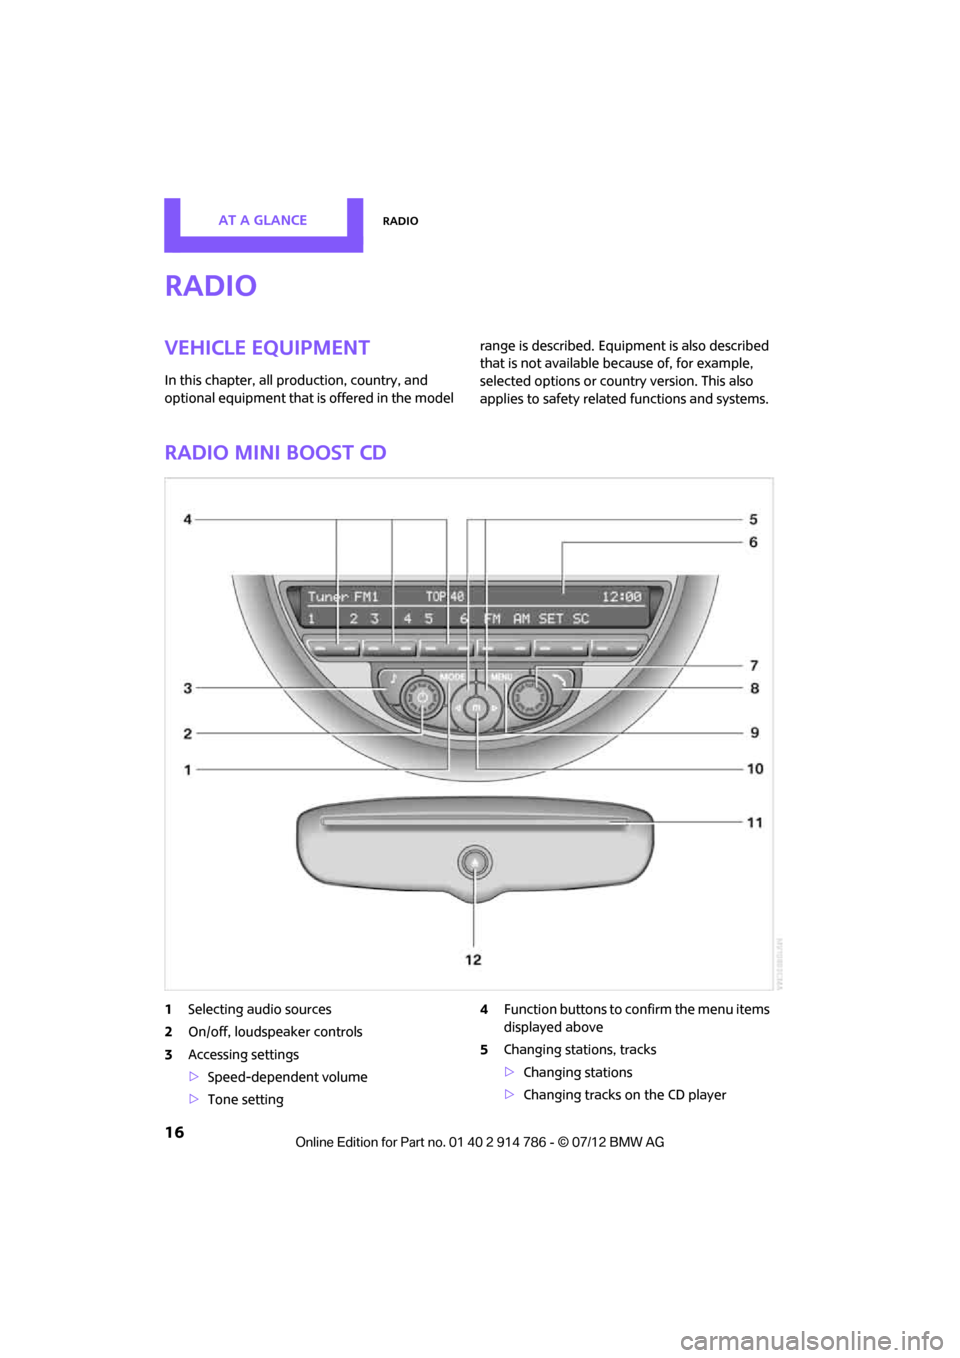 MINI Coupe 2012  Owners Manual AT A GLANCERadio
16
Radio
Vehicle equipment
In this chapter, all production, country, and 
optional equipment that is offered in the model range is described. Equi
pment is also described 
that is not